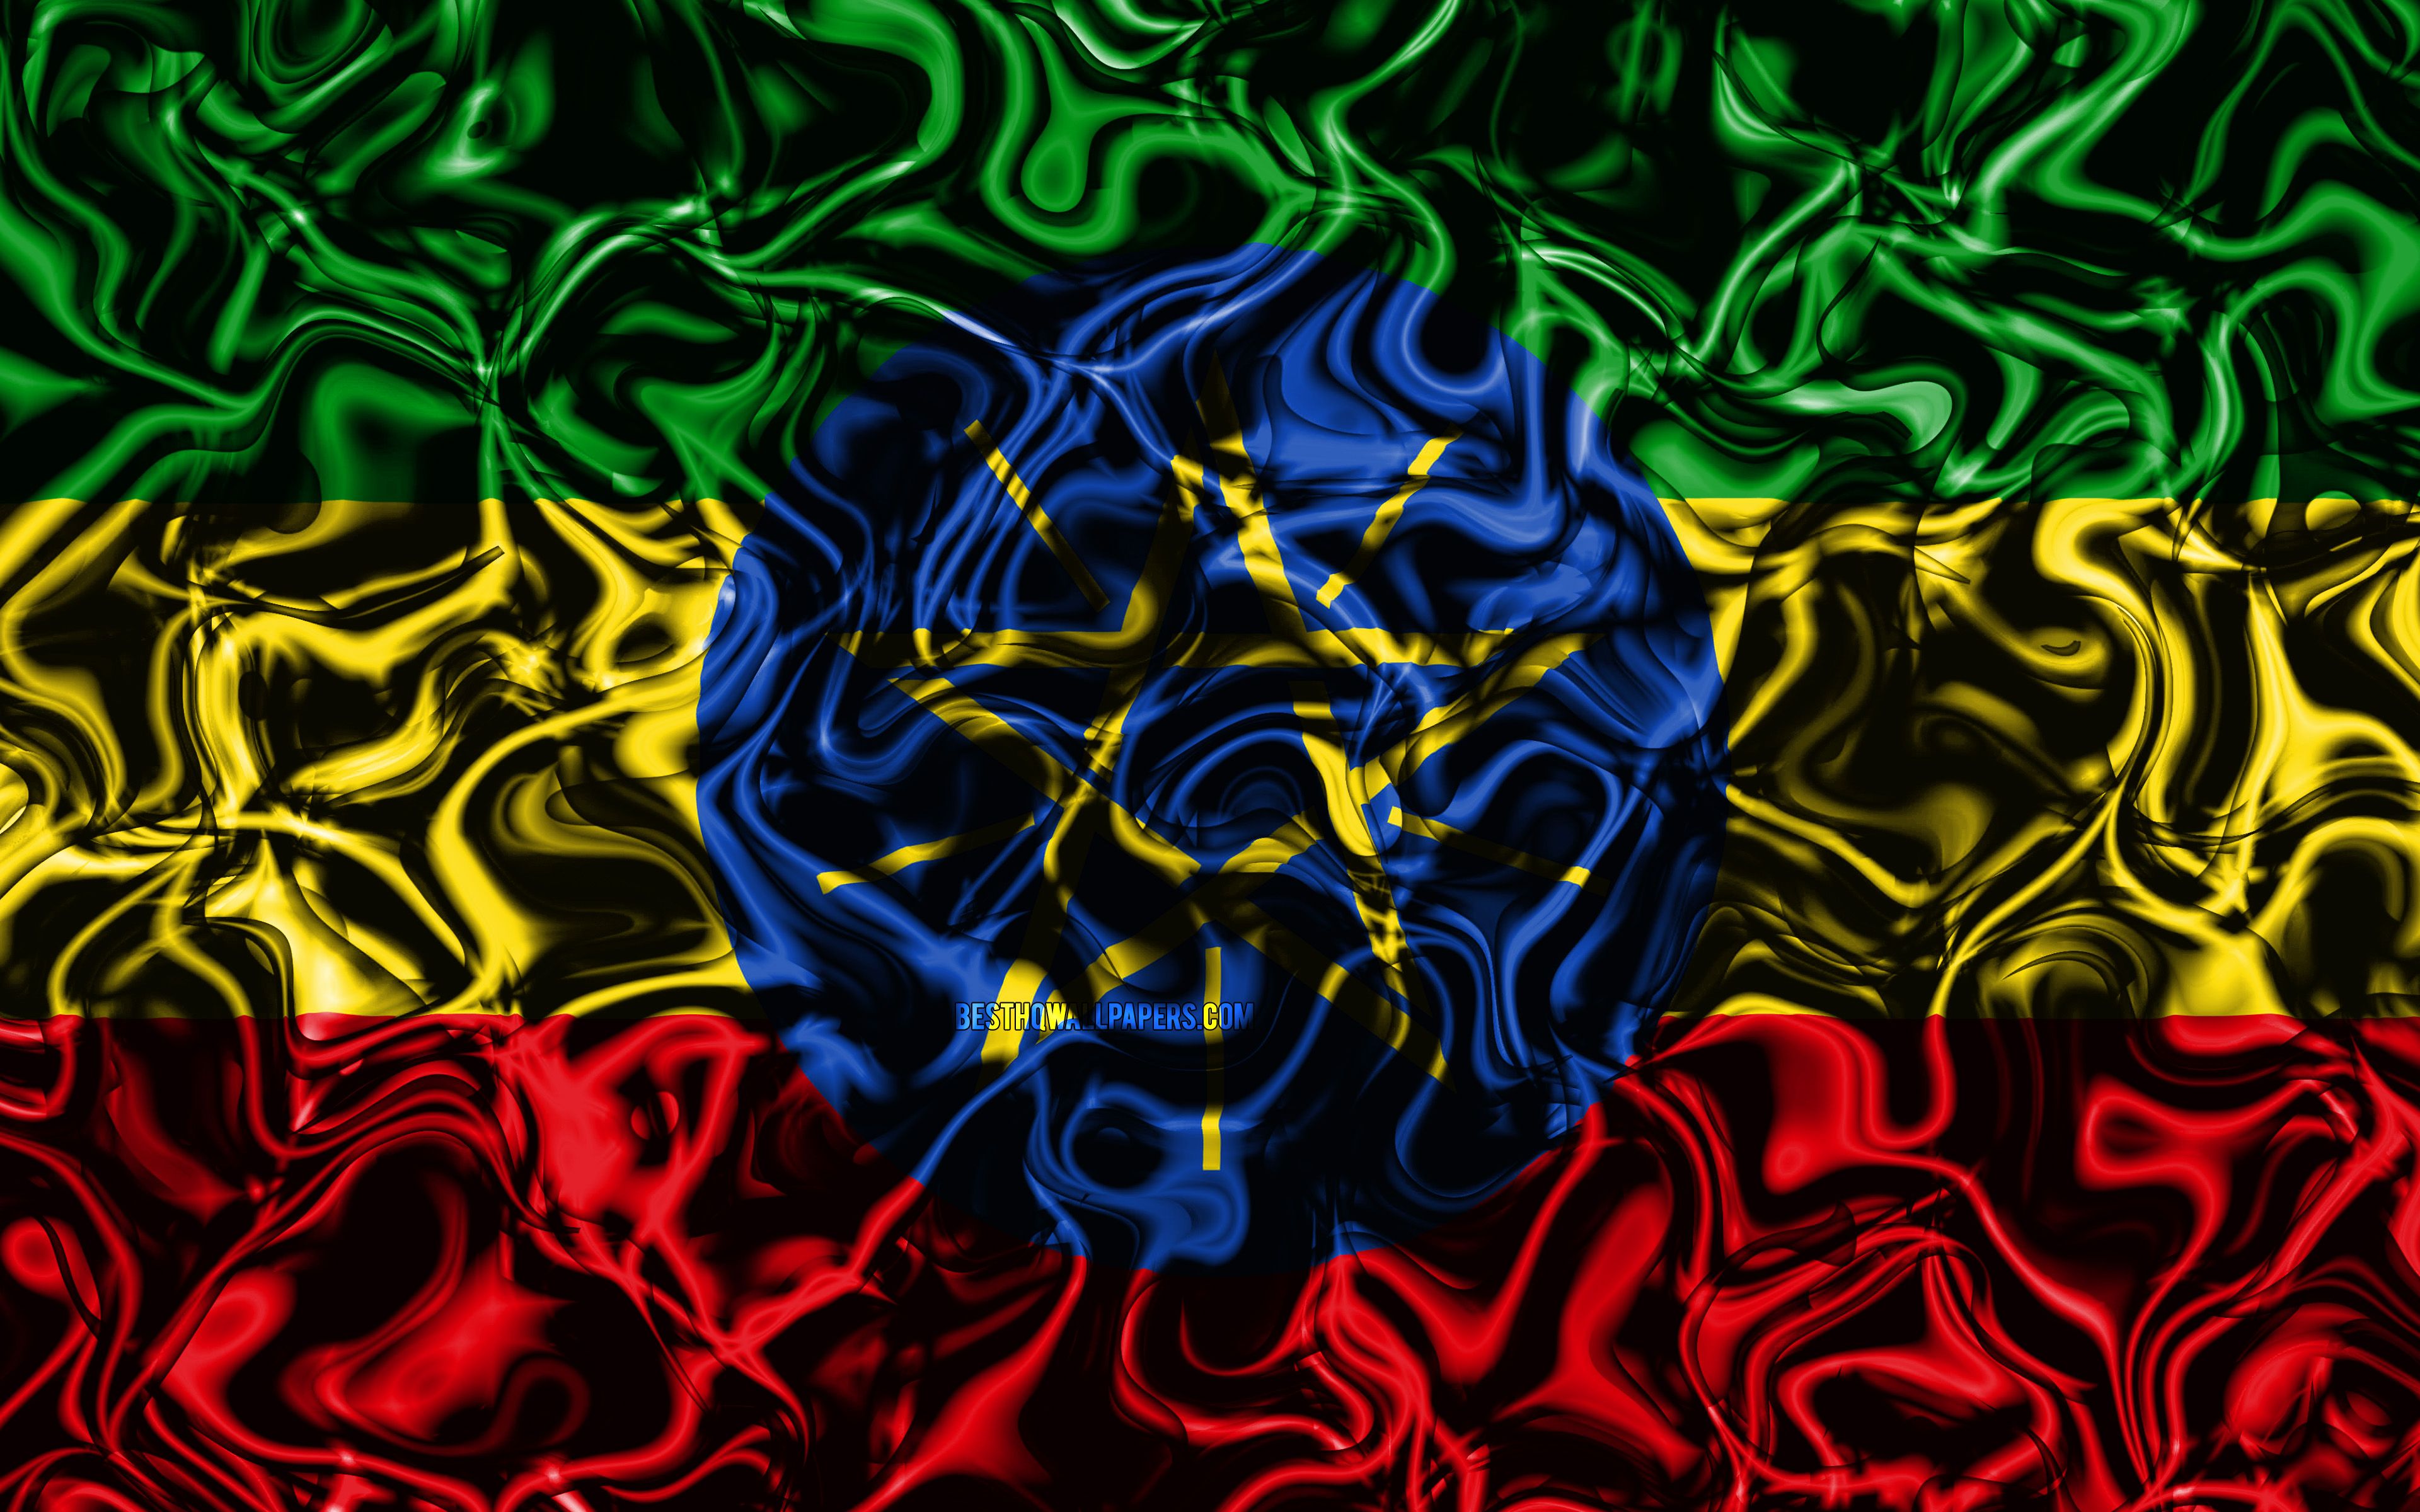 Download wallpaper 4k, Flag of Ethiopia, abstract smoke, Africa, national symbols, Ethiopian flag, 3D art, Ethiopia 3D flag, creative, African countries, Ethiopia for desktop with resolution 3840x2400. High Quality HD picture wallpaper